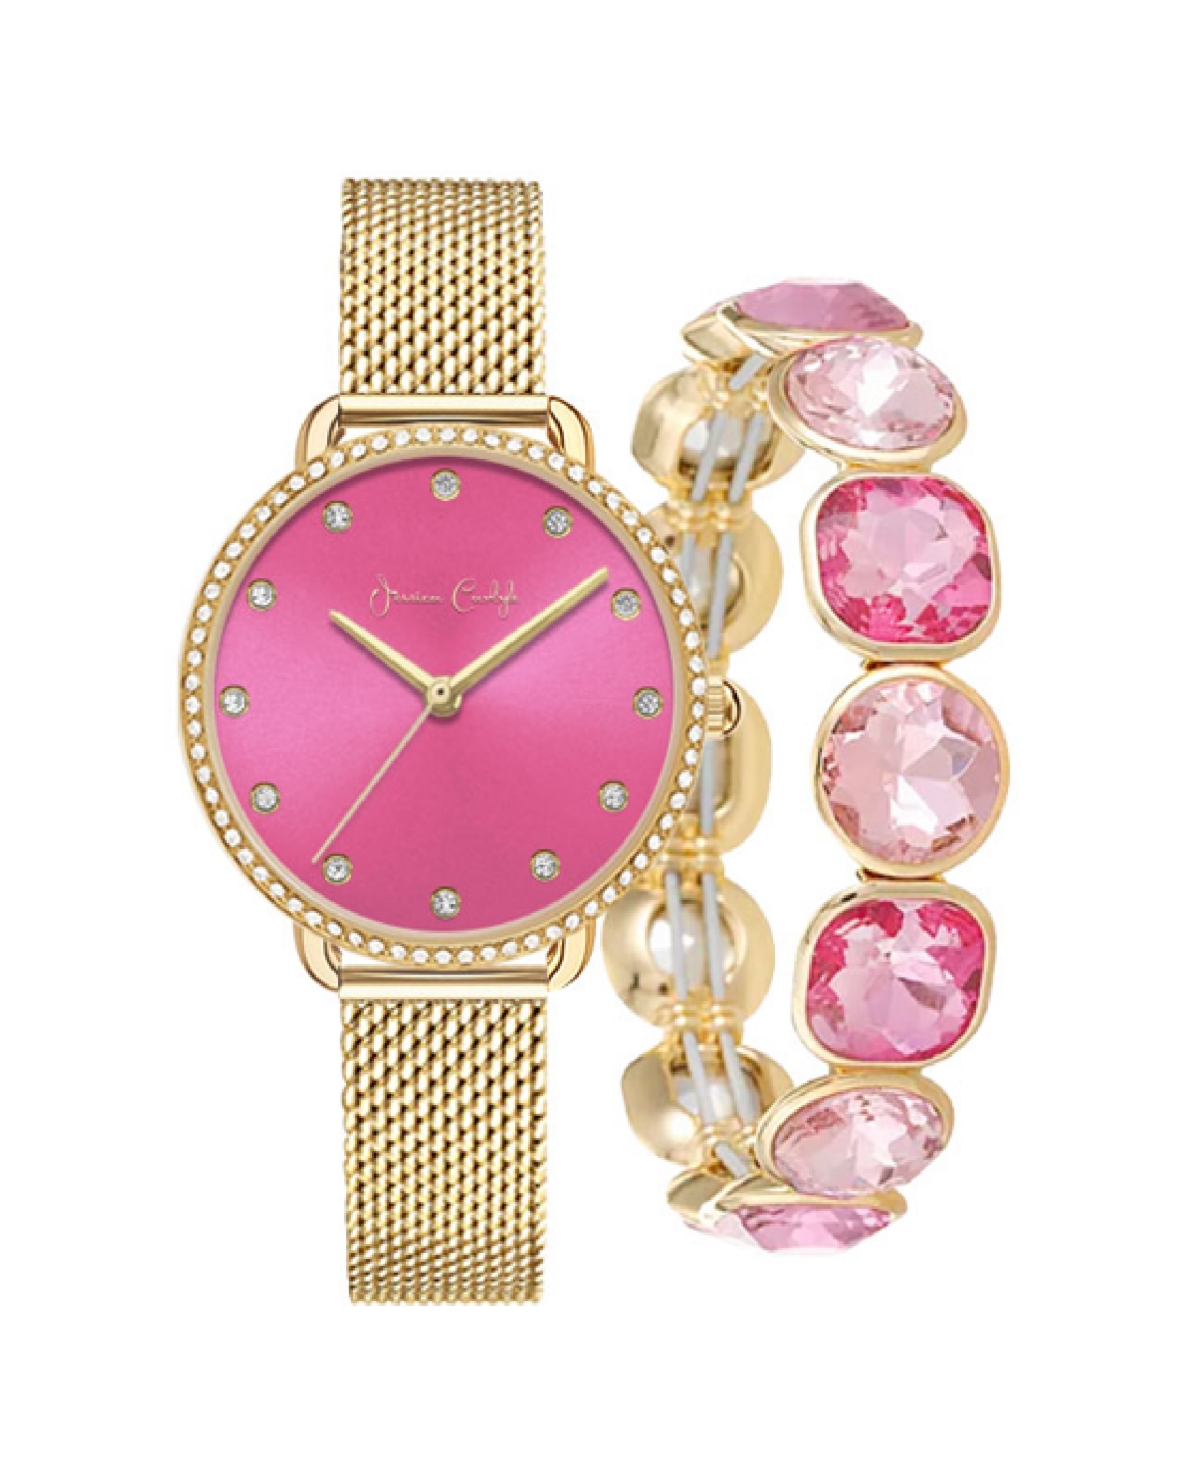 Jessica Carlyle Women's Quartz Gold-tone Alloy Watch 34mm Gift Set In Shiny Gold,pink Sunray